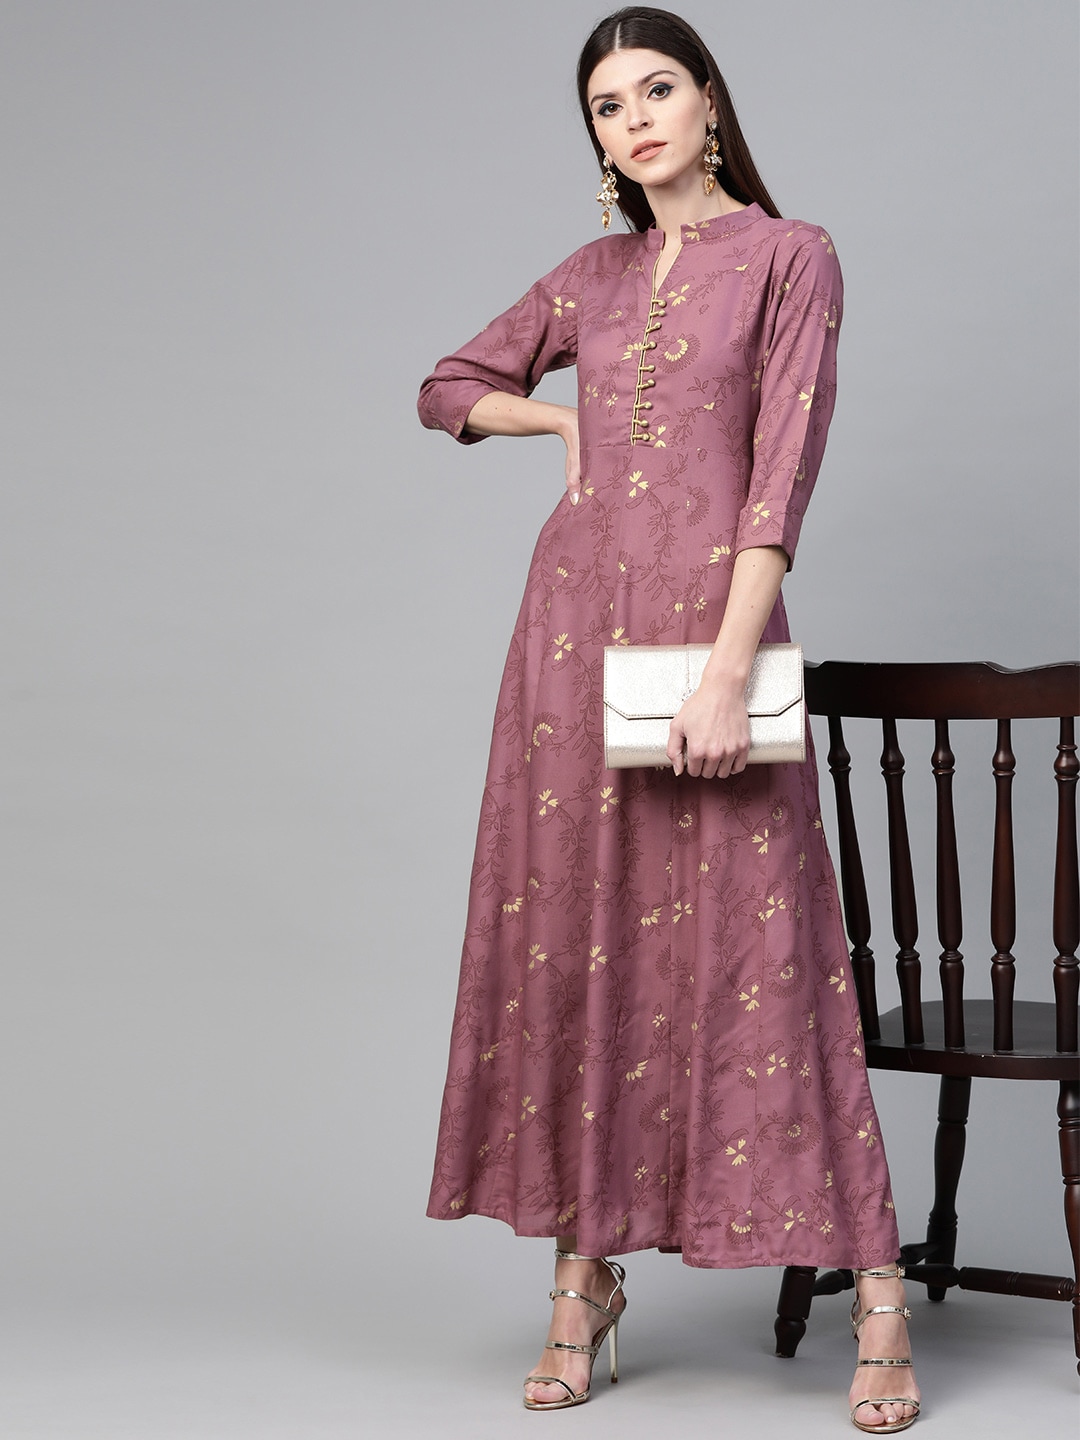 See Designs Women Mauve & Golden Printed Maxi Dress Price in India